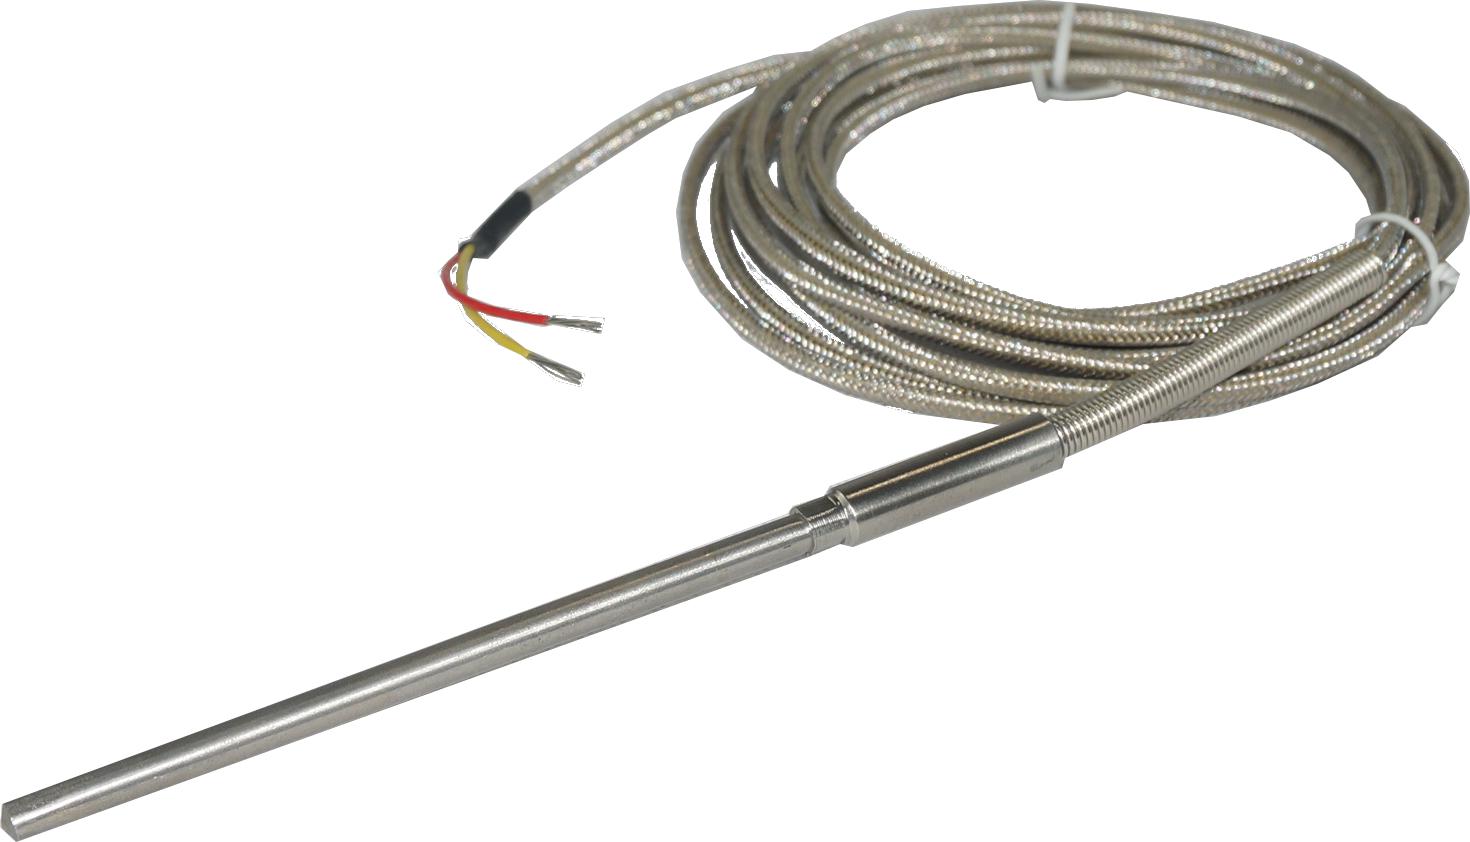 FTCK Series Type K Thermocouples MIMS Class A, Standard Sizes and Lengths, Braided SS/Fibreglass/Teflon Tail, 304 Stainless Steel Sheath, CE ANSI ROHS Approved, -20 to 700 Deg C